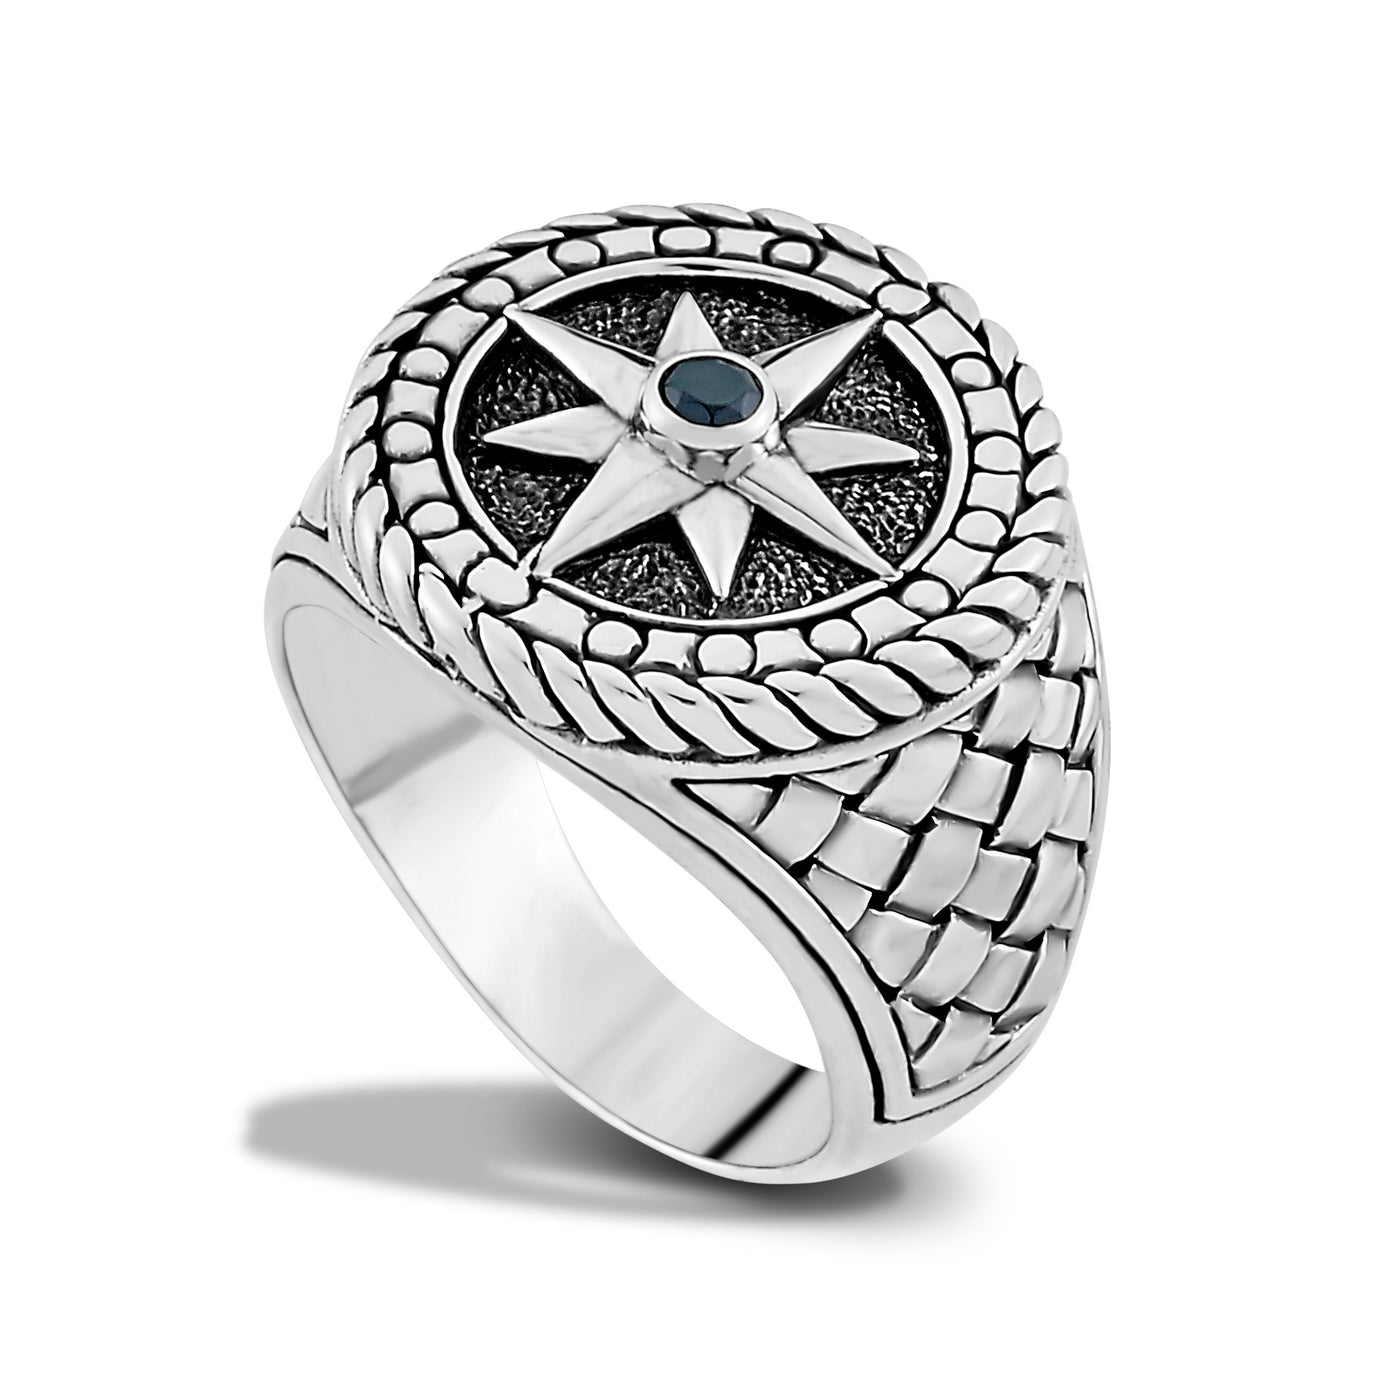 SS QUILTED DESIGN STAR RING W/ BLACK SPINEL